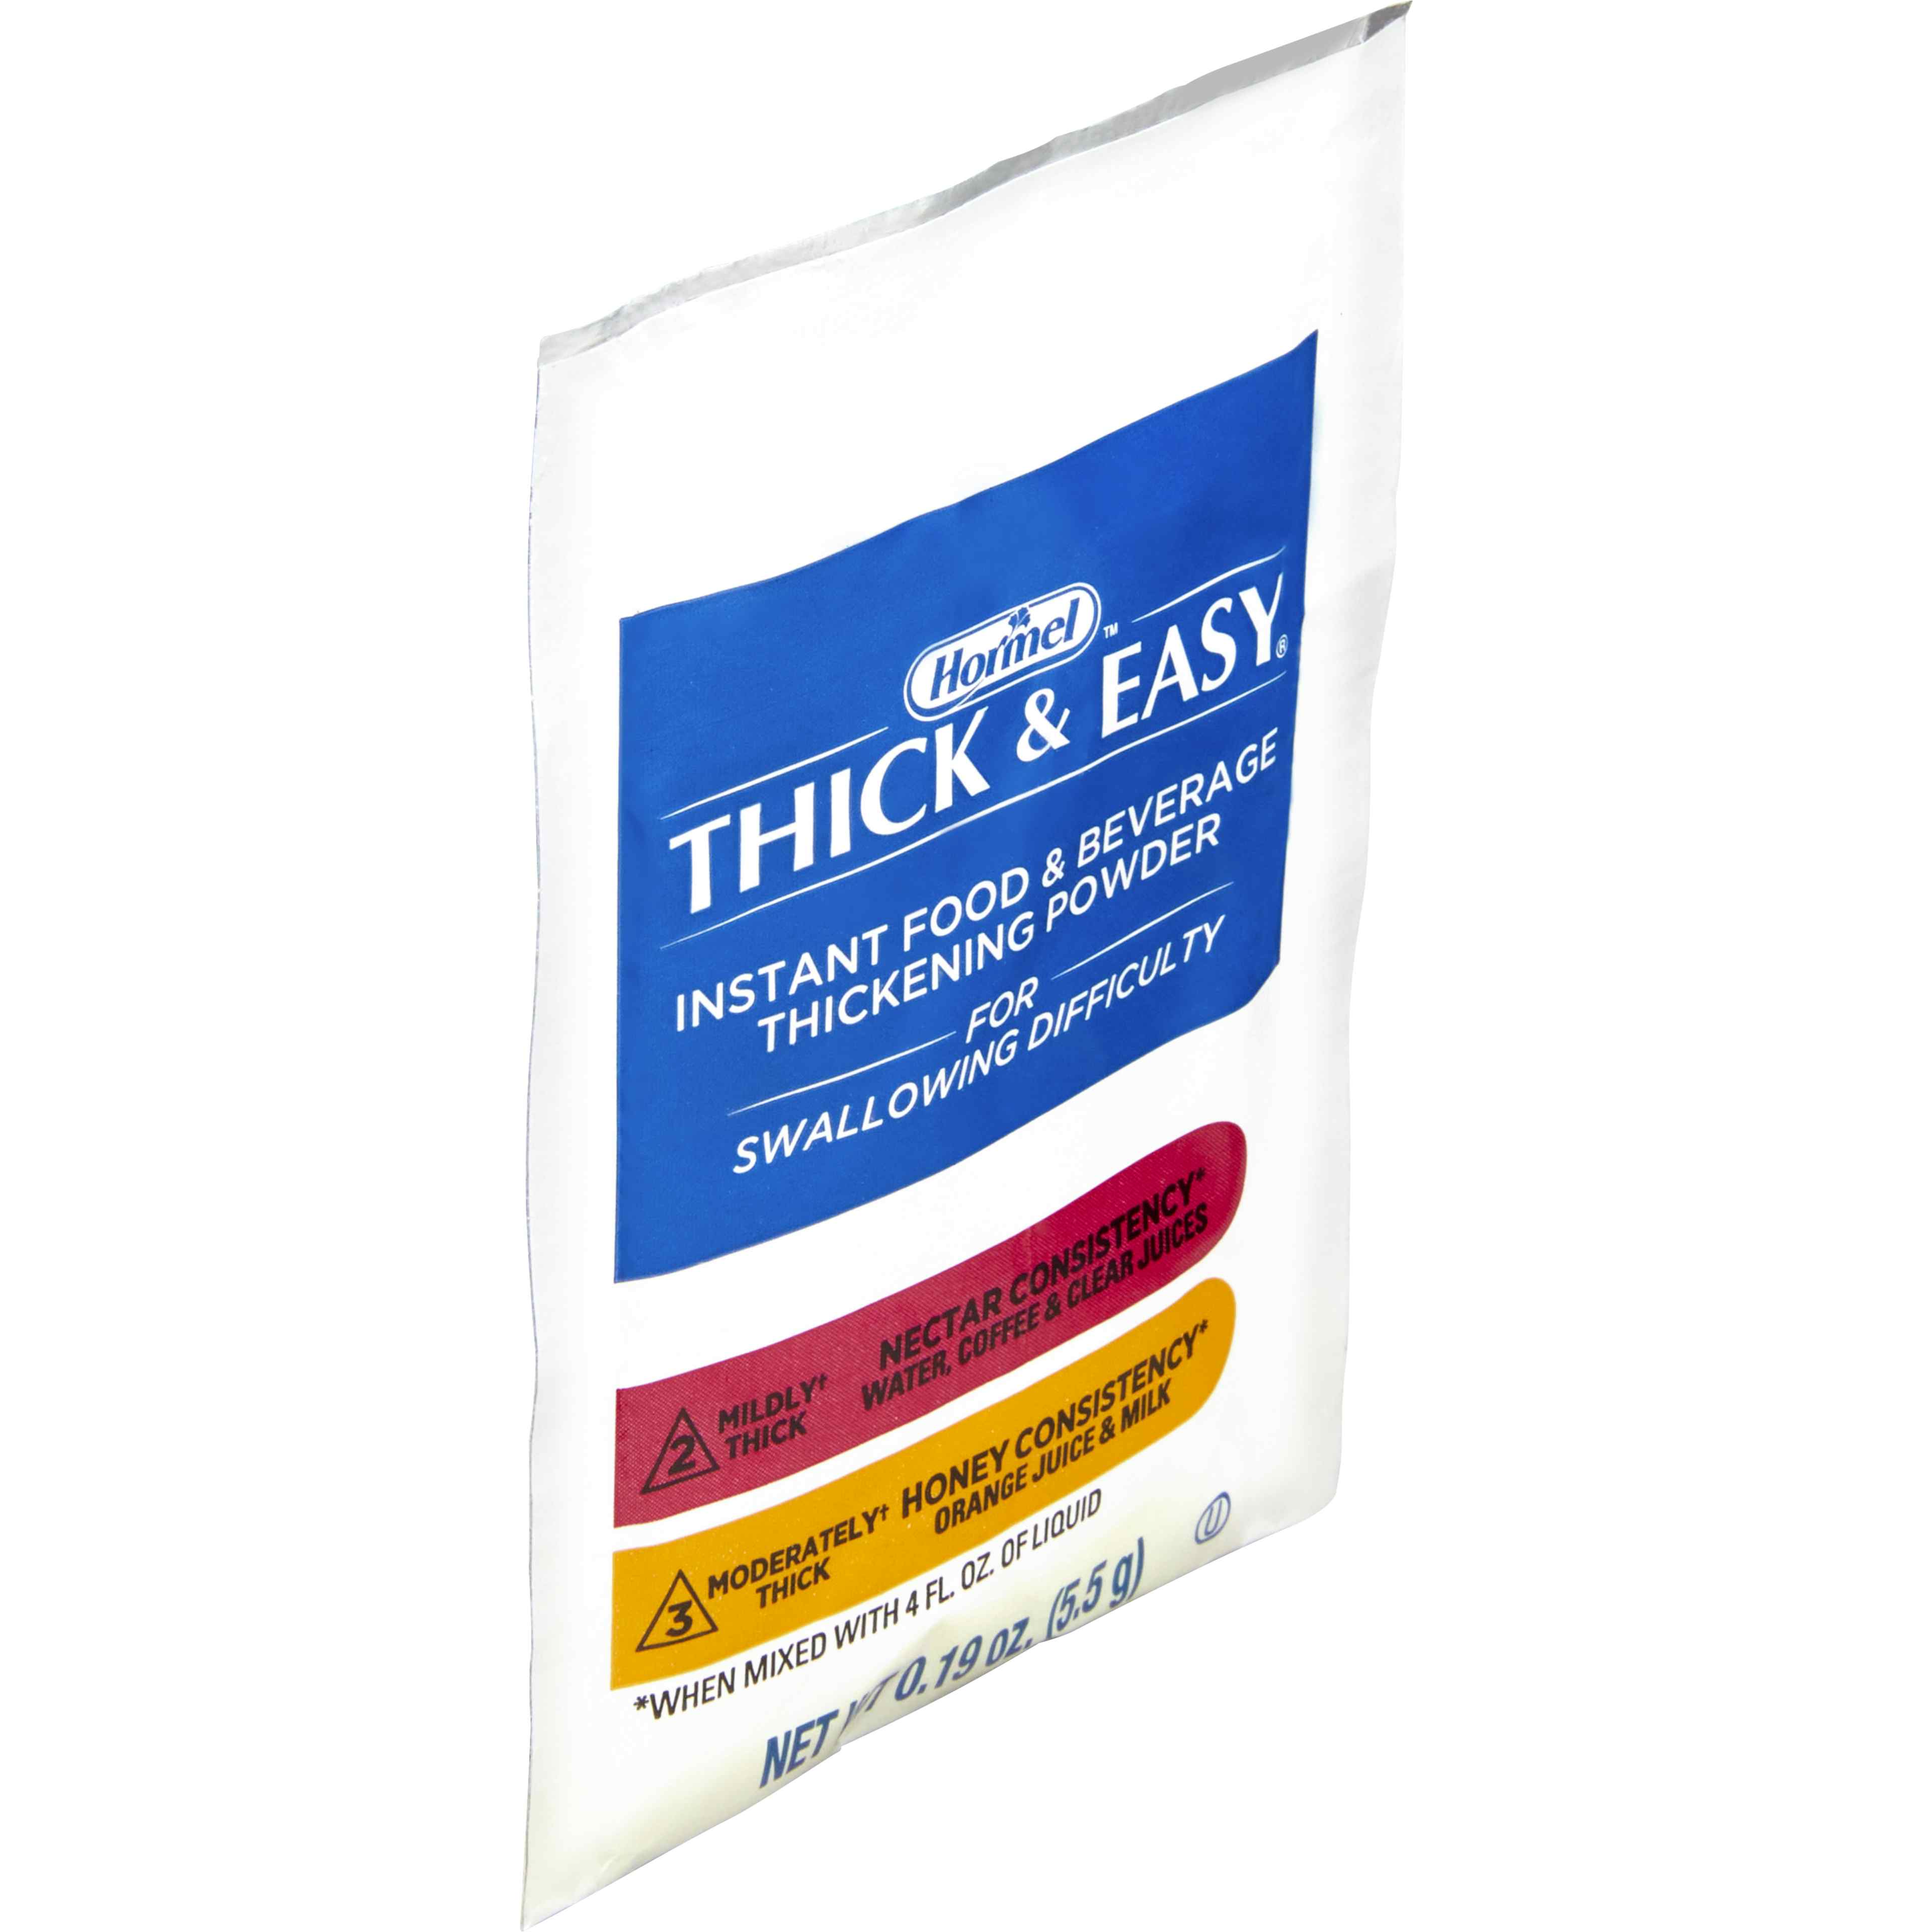 Hormel Thick & Easy Instant Food & Beverage Thickening Powder, Honey & Nectar Consistency